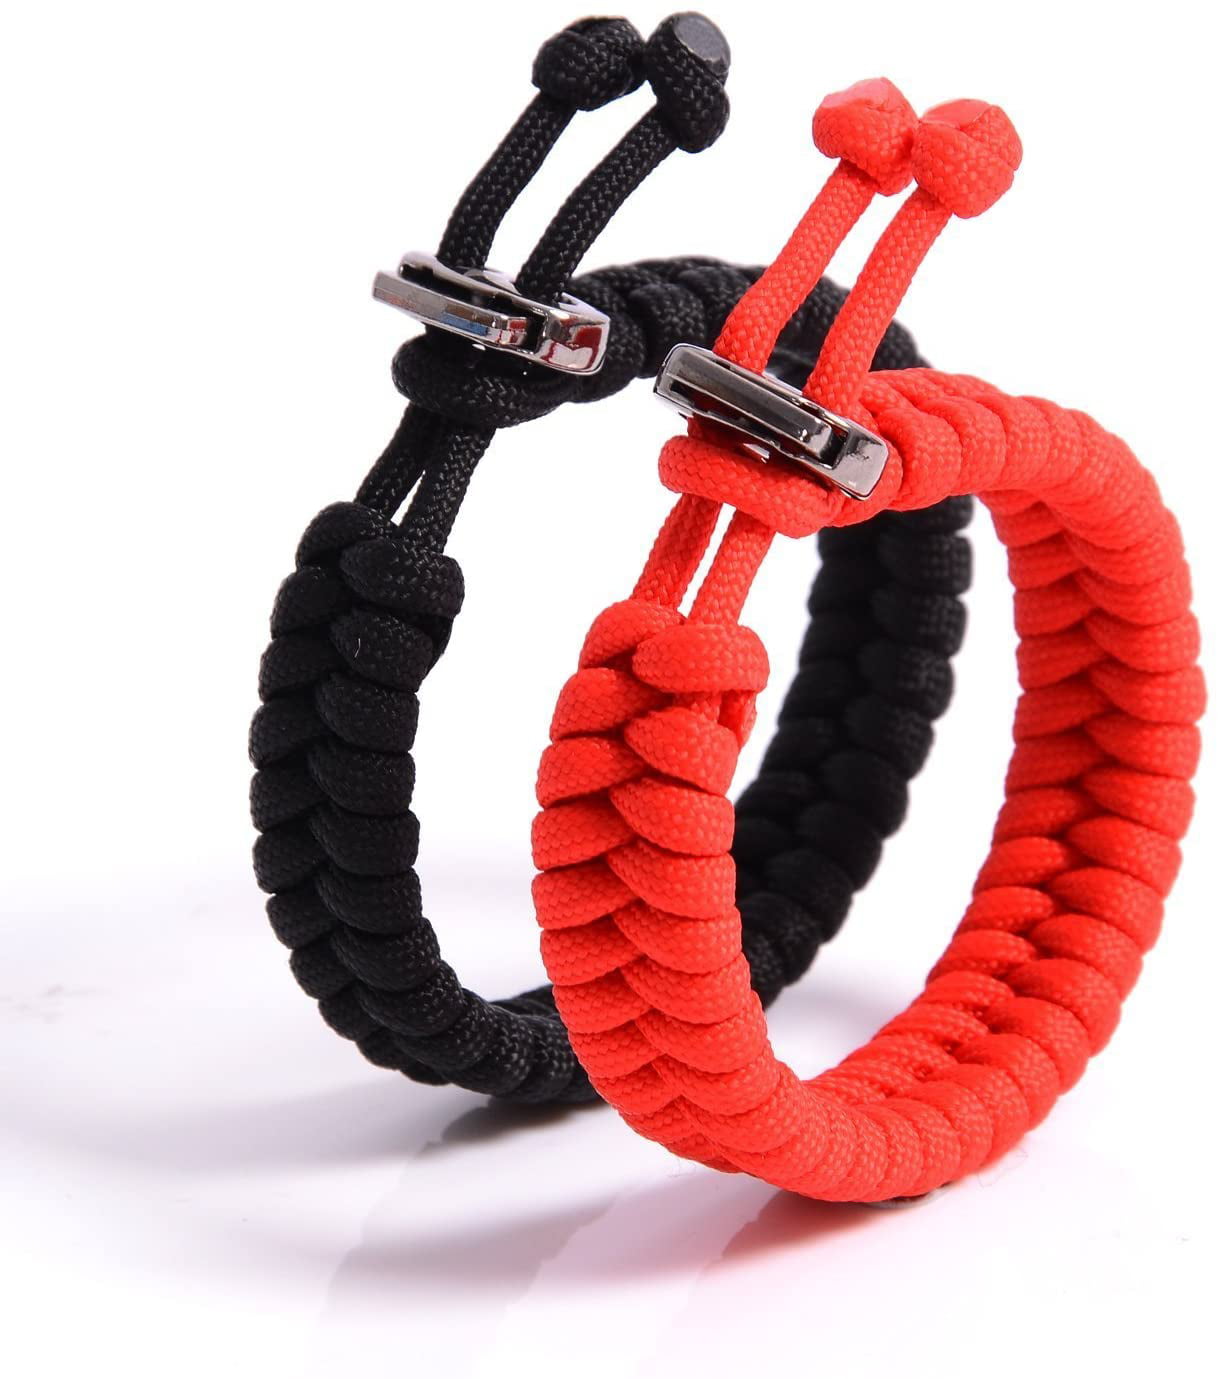 Every Day Carry 95 Survival Paracord Bracelet Plastic Release Buckle   Red  Walmartcom